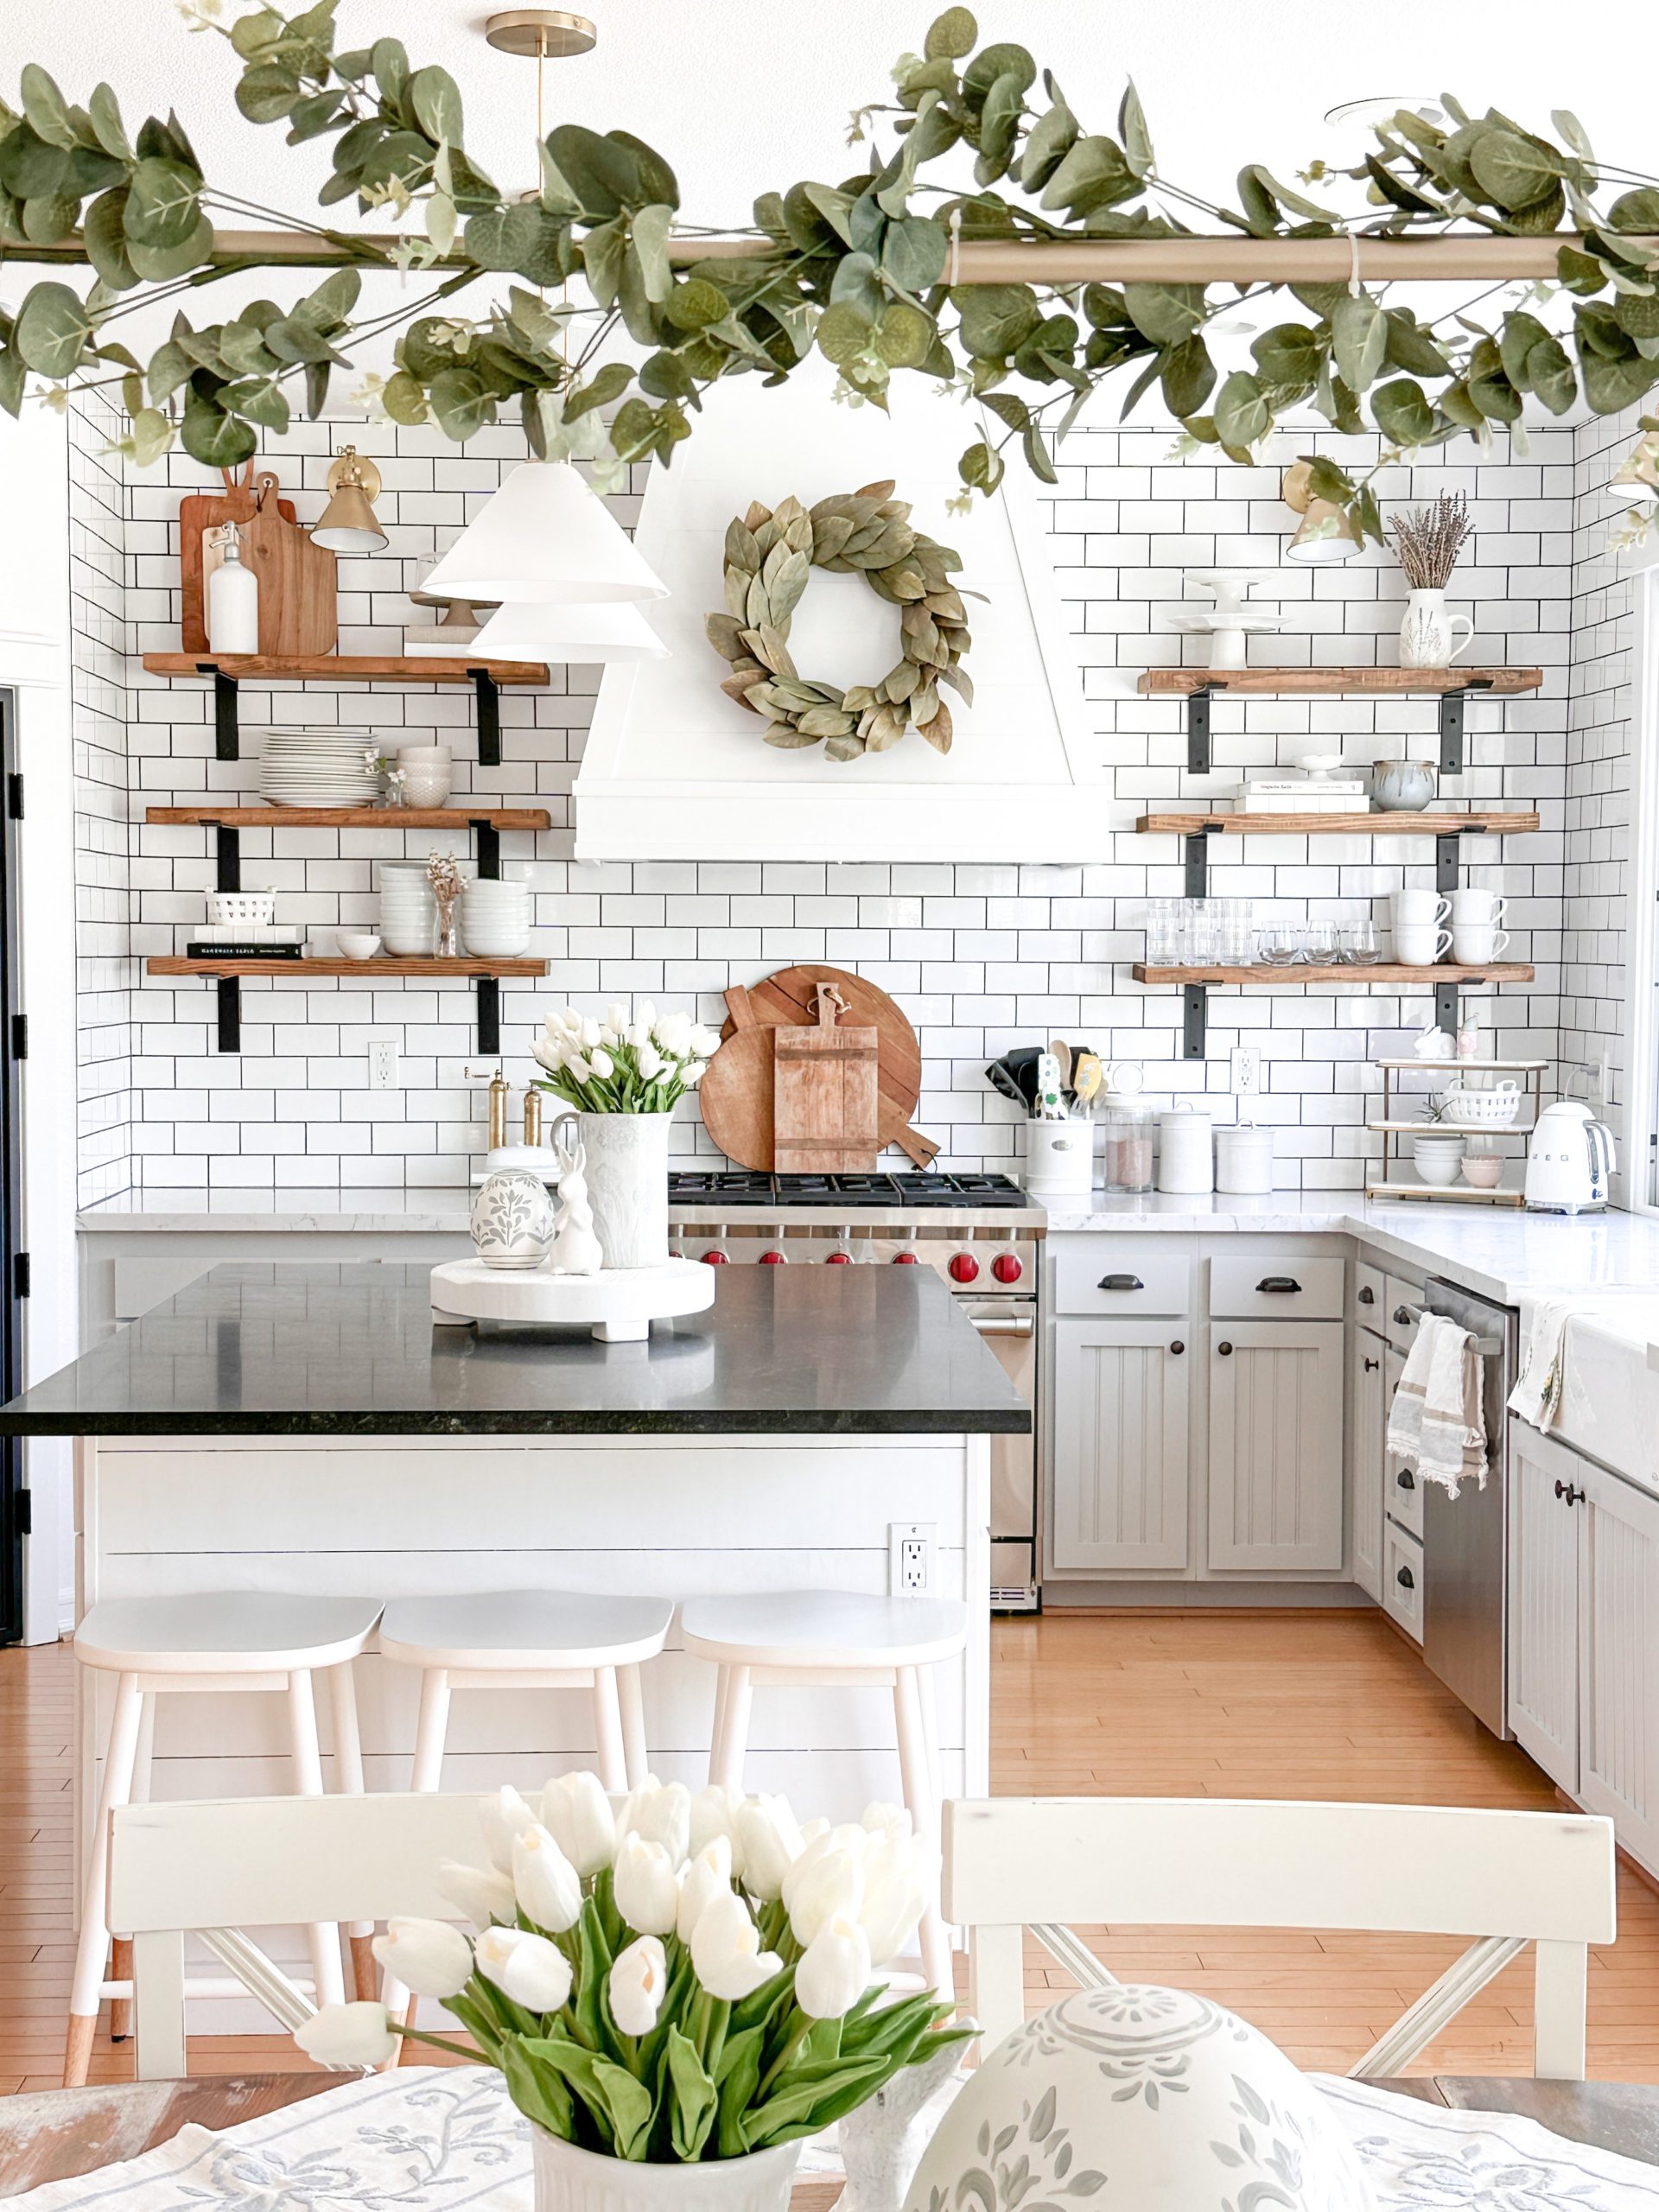 15 Kitchen Decorating Posts You Need to Read - Pasha is Home